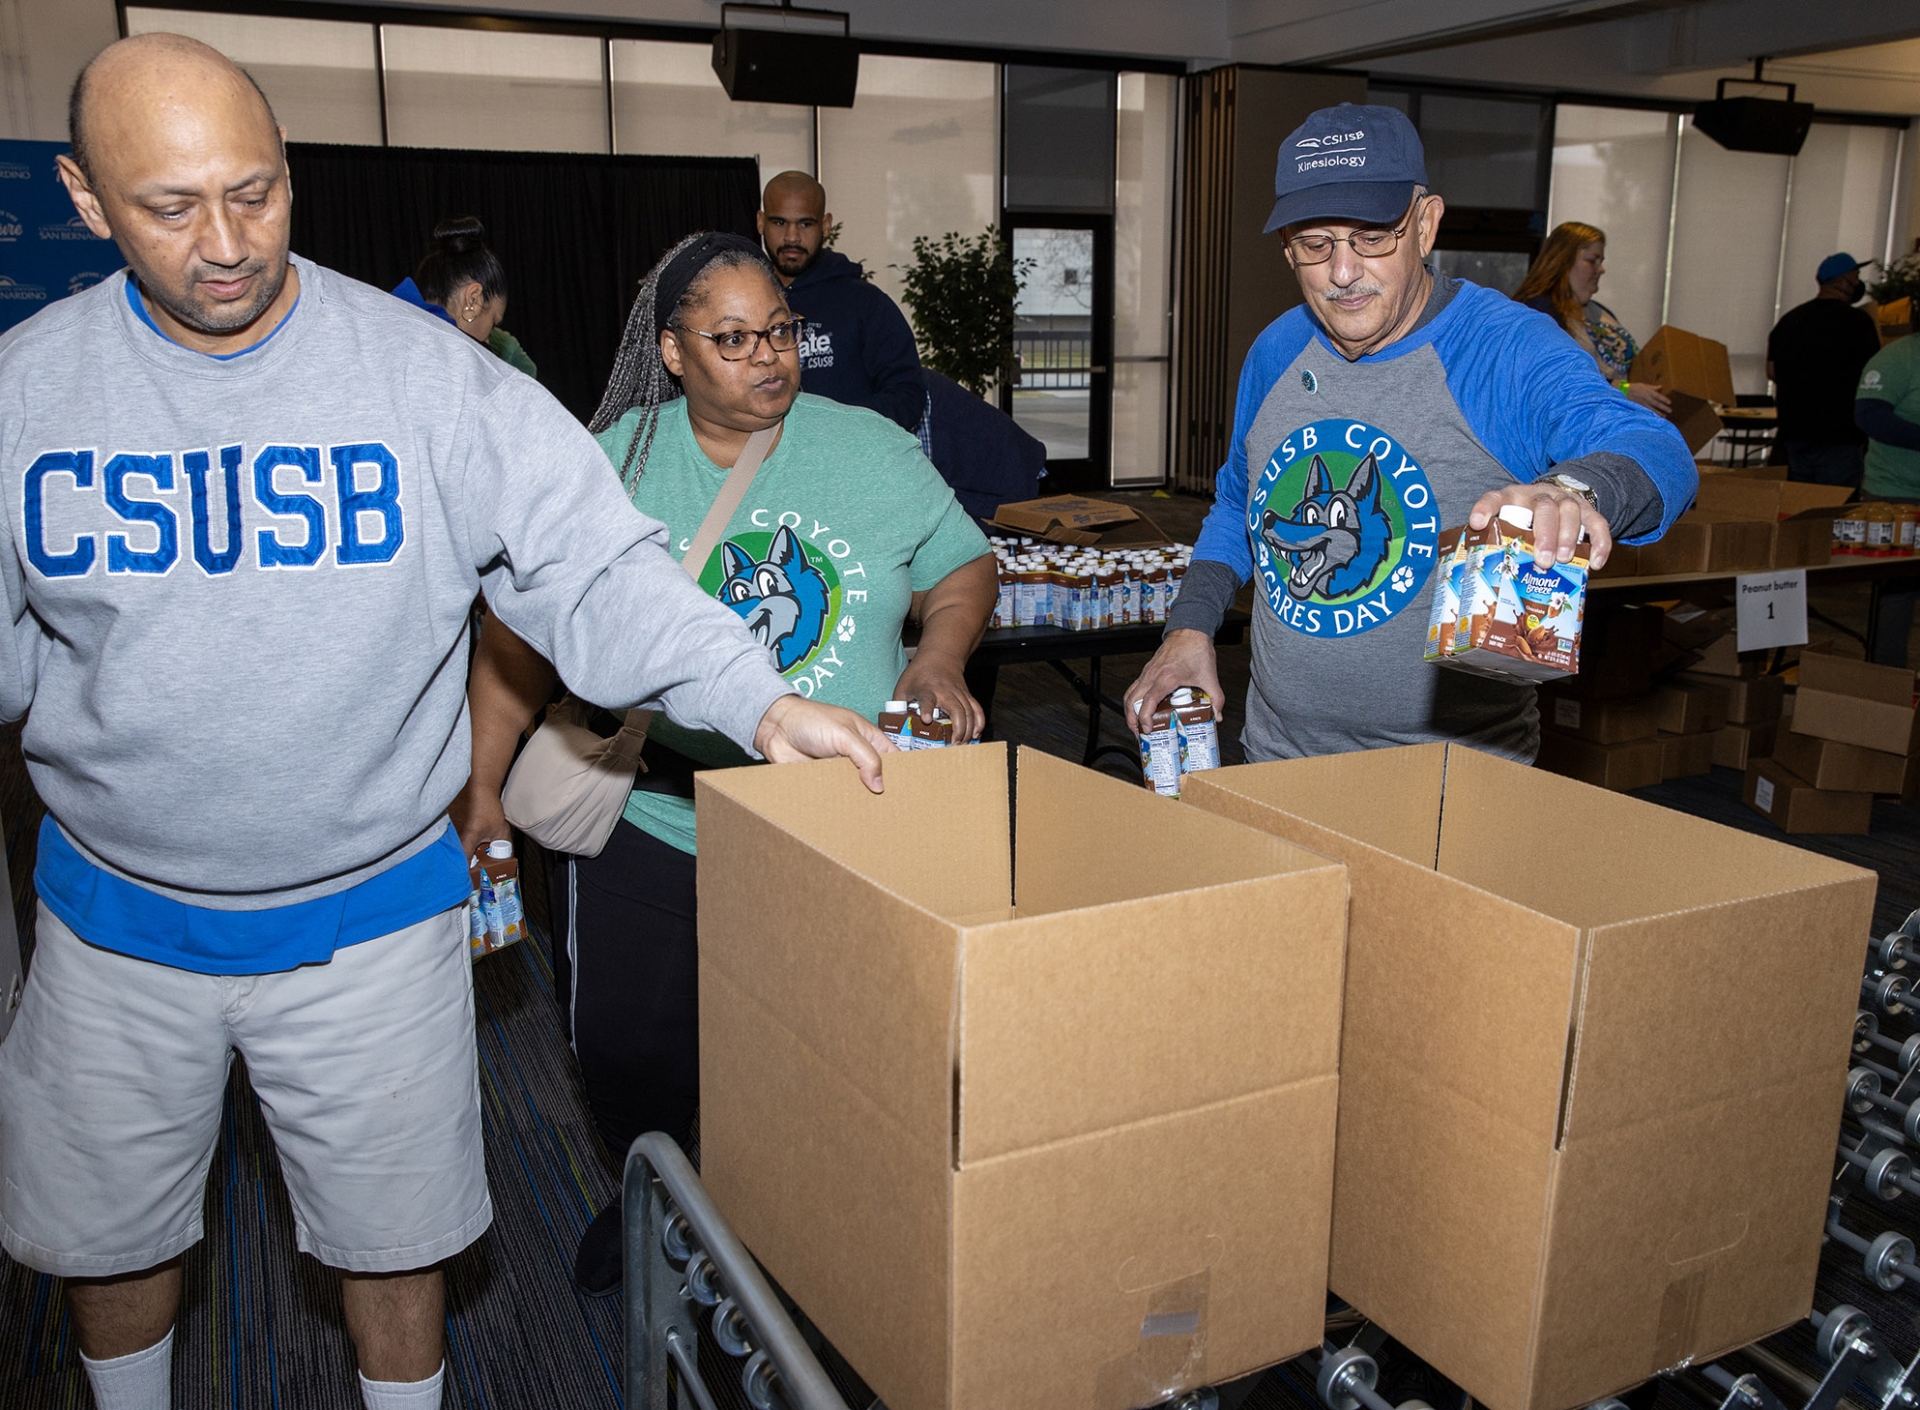 CSUSB President Tomás D. Morales (far right) was one of the volunteers who packed food for a local pantry during Coyote Cares Day on Feb. 17.